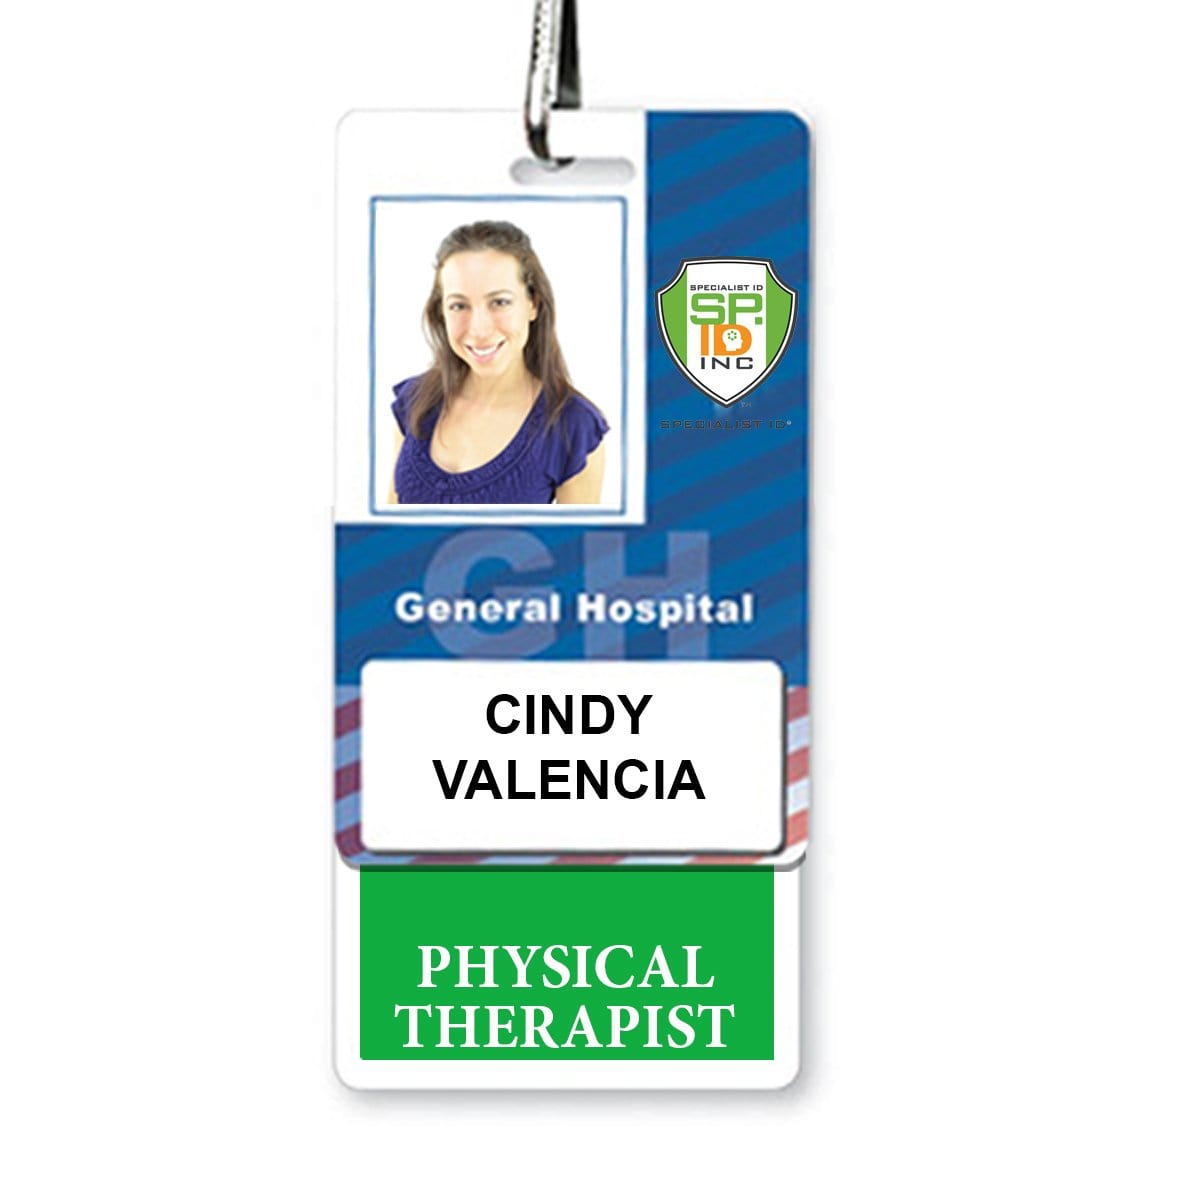 Green Physical Therapist Vertical Badge Buddy with Green Border BB-PHYSICALTHERAPIST-GREEN-V